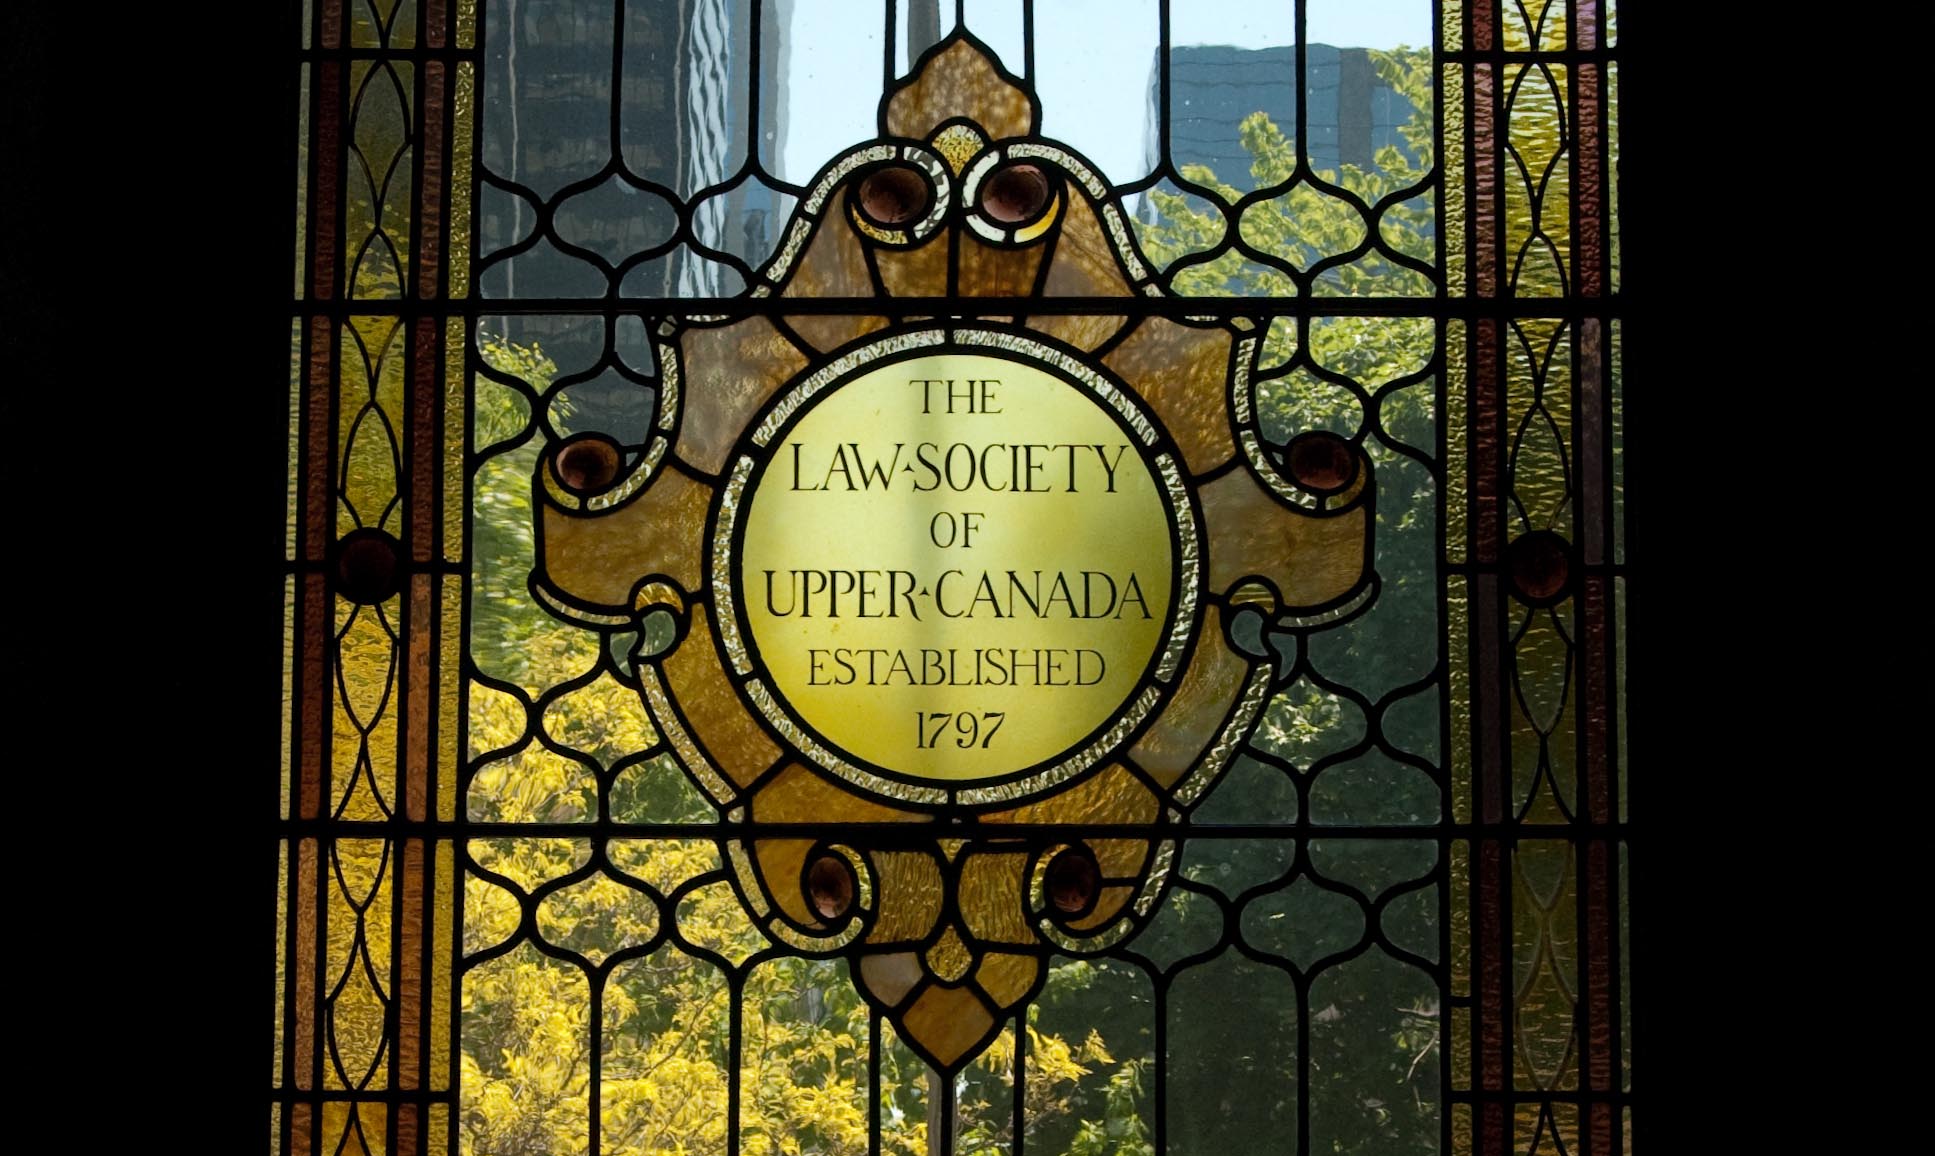 In 2012, the Law Society of Upper Canada (LSUC) struck a Working Group to investigate the challenges faced by racialized licensees, who comprise approximately 18 per cent of lawyers in Ontario.